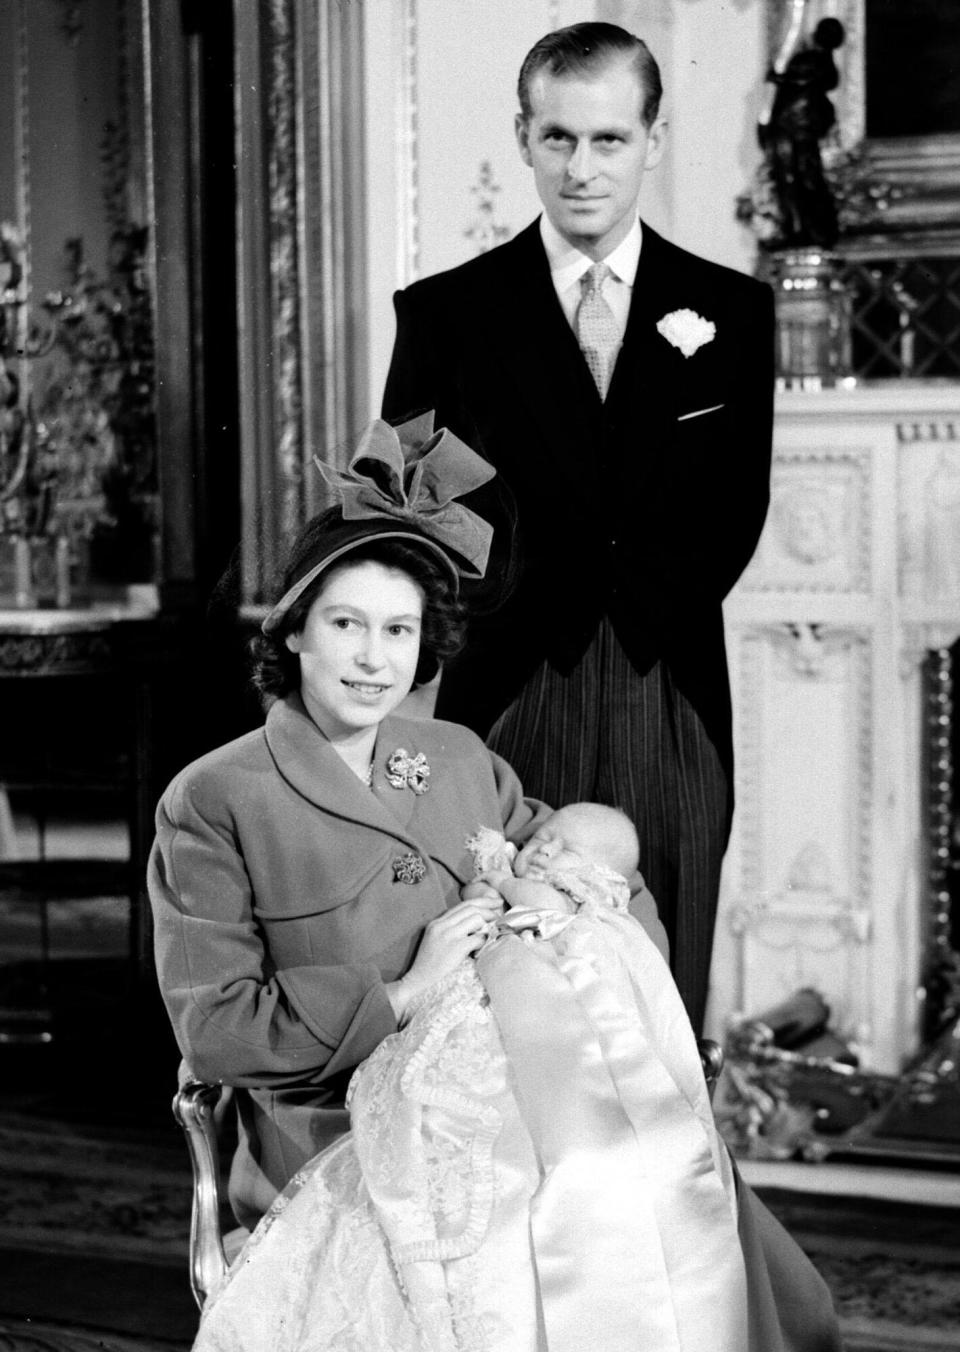 The Duke of Edinburgh and Princess Elizabeth with their son Prince Charles after his Christening ceremony